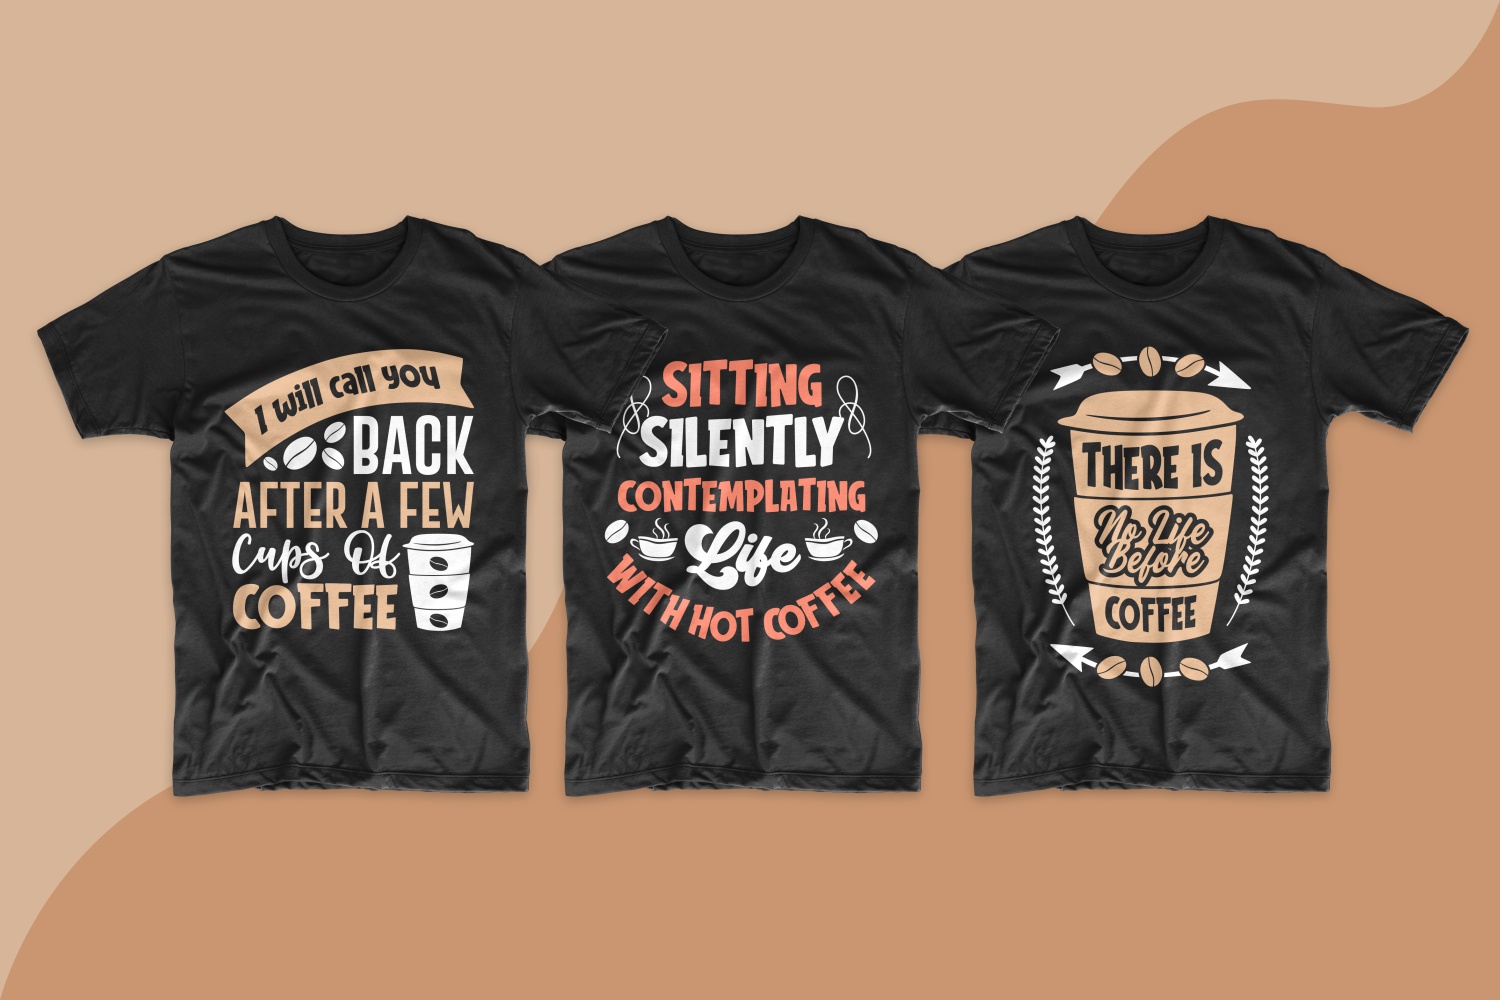 Stylish black T-shirts with various designs on the coffee theme.